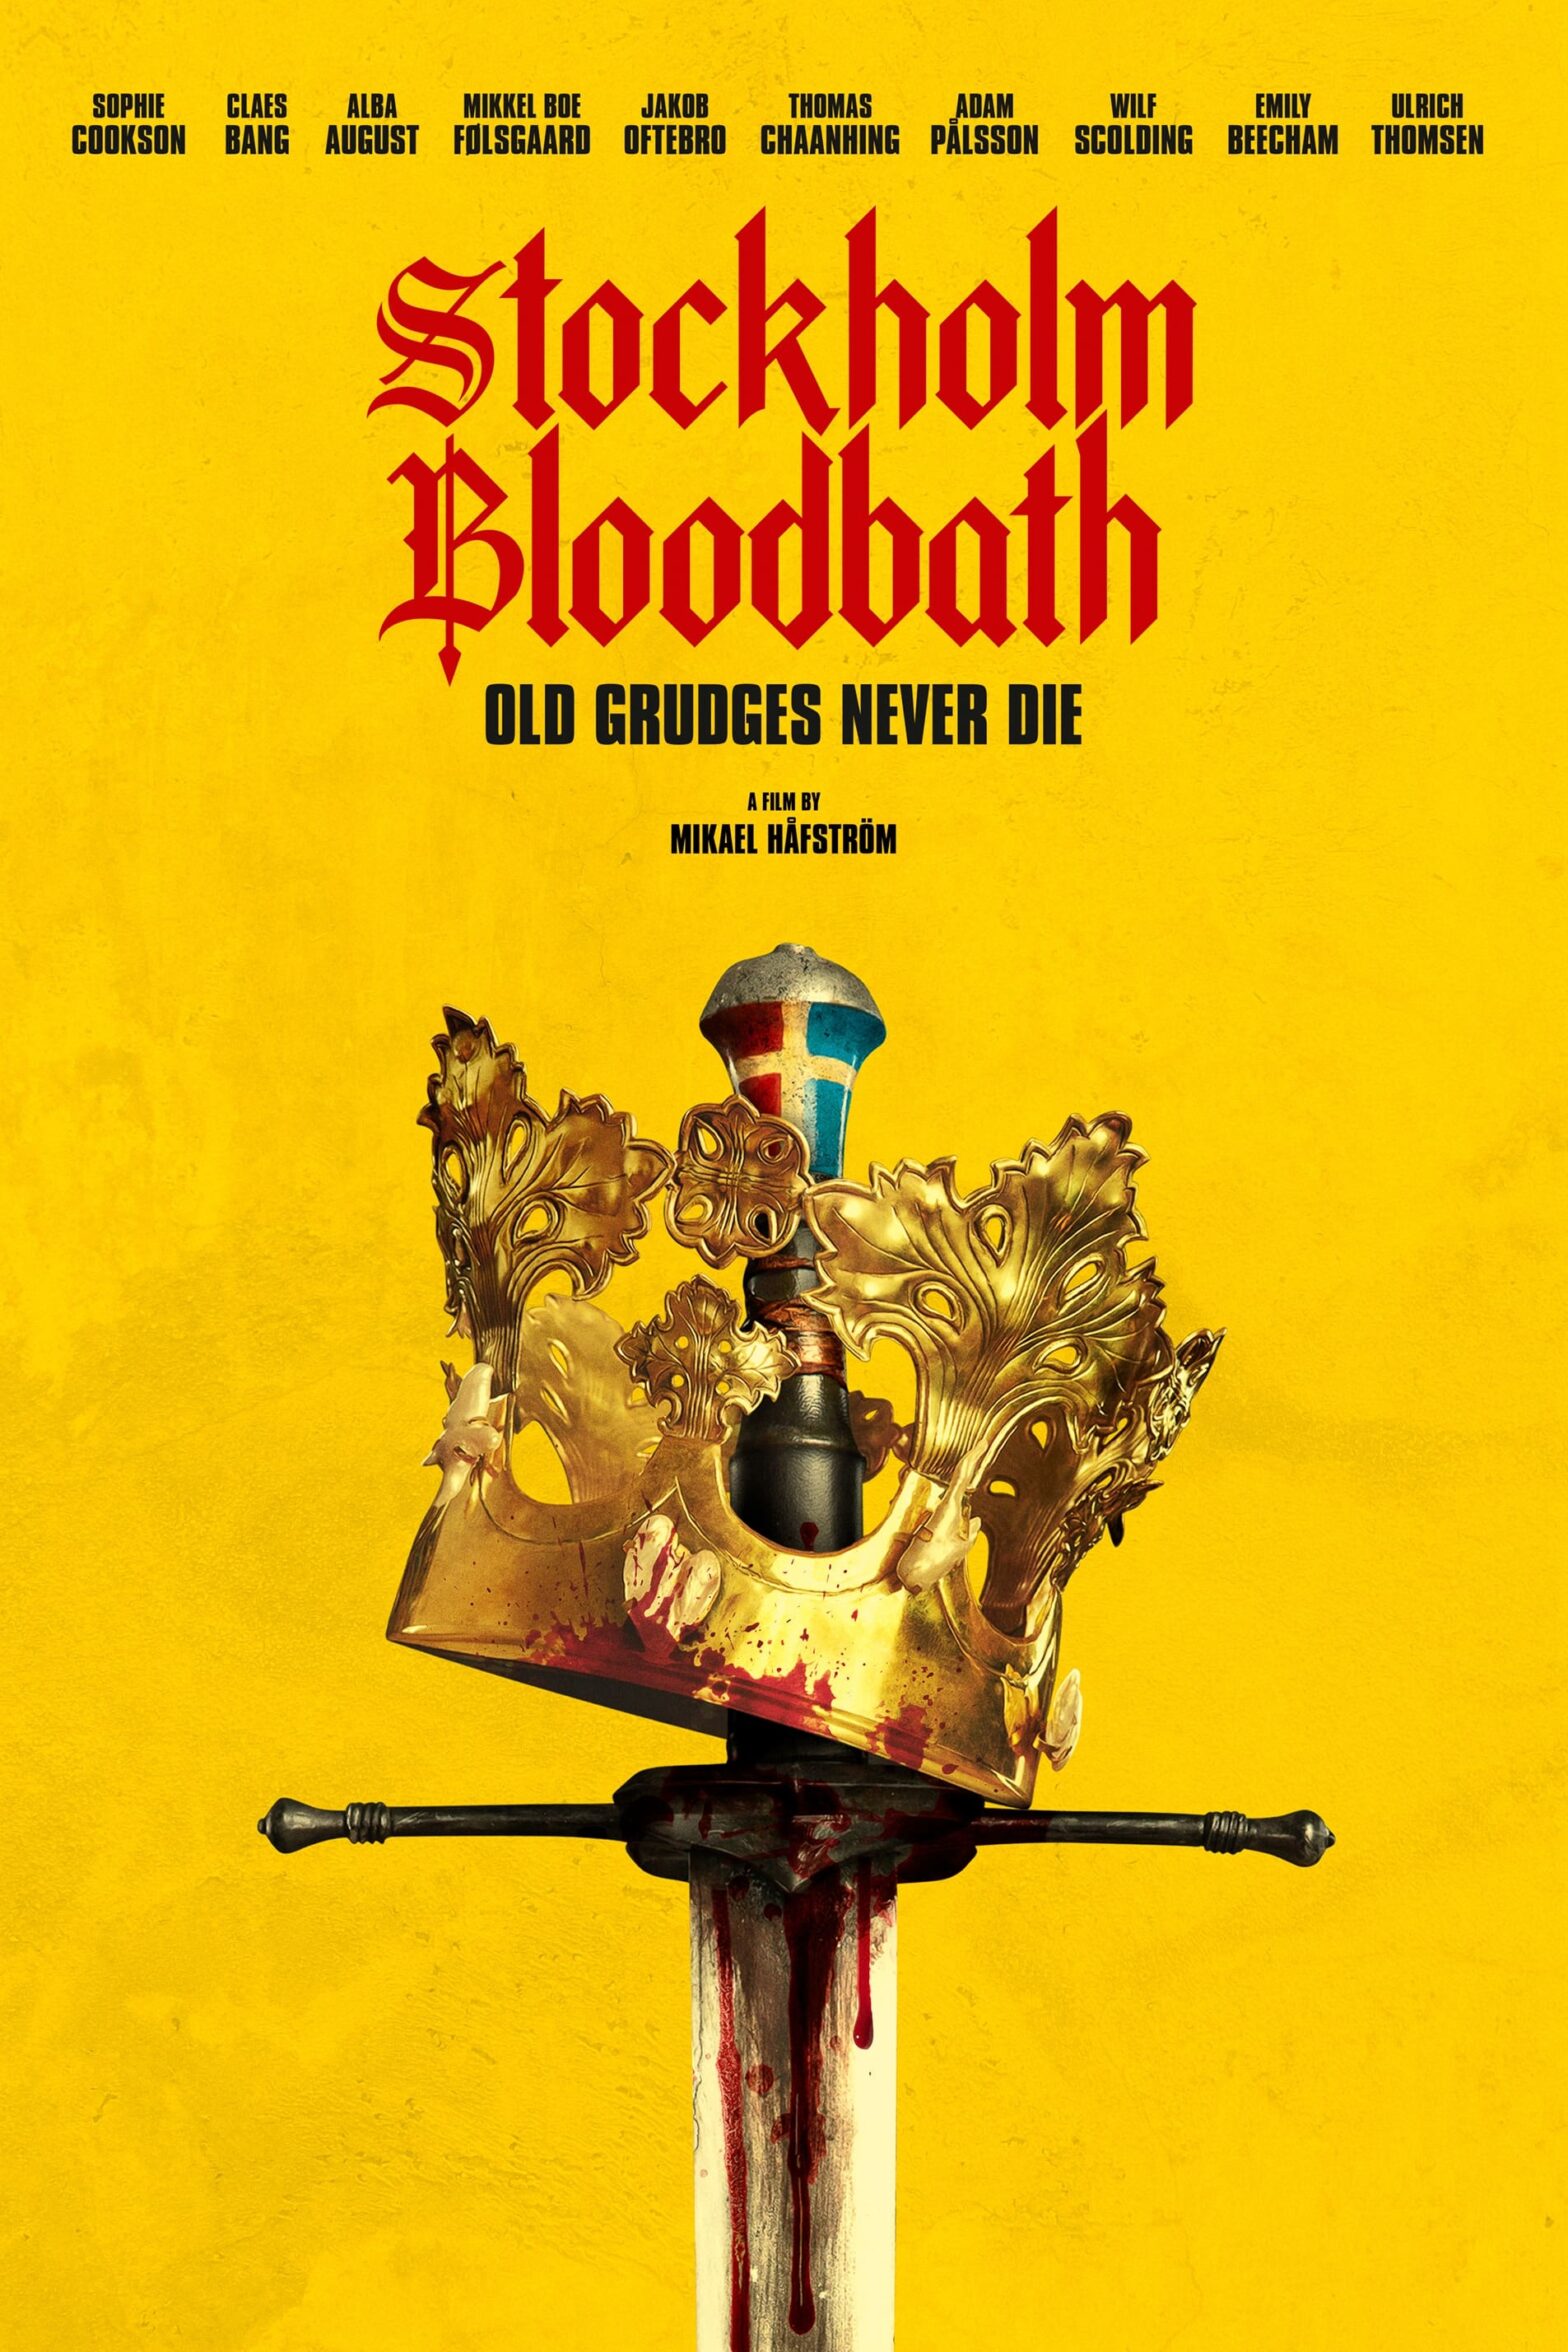 Poster for the movie "Stockholm Bloodbath"